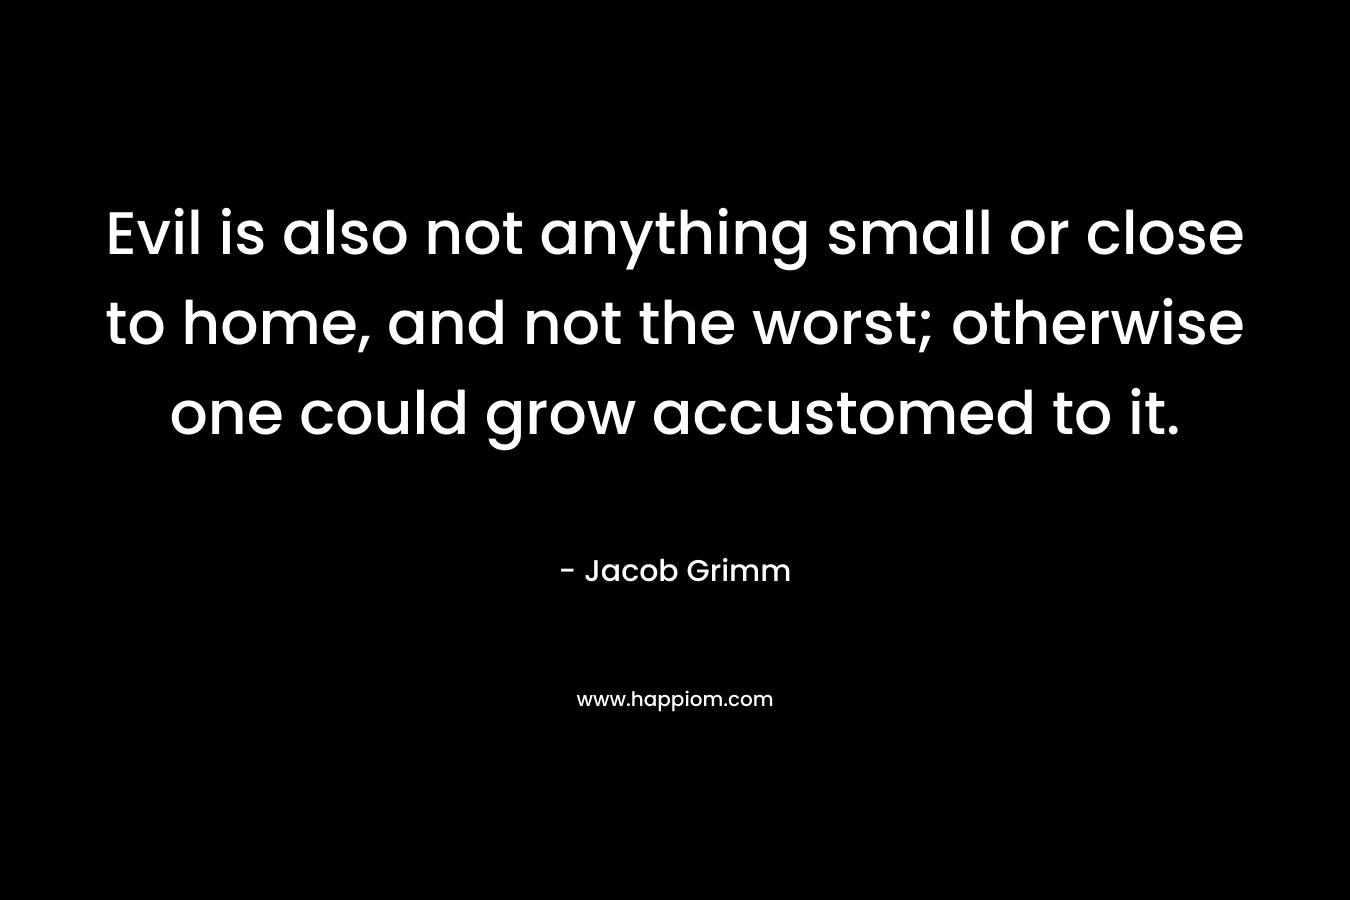 Evil is also not anything small or close to home, and not the worst; otherwise one could grow accustomed to it. – Jacob Grimm